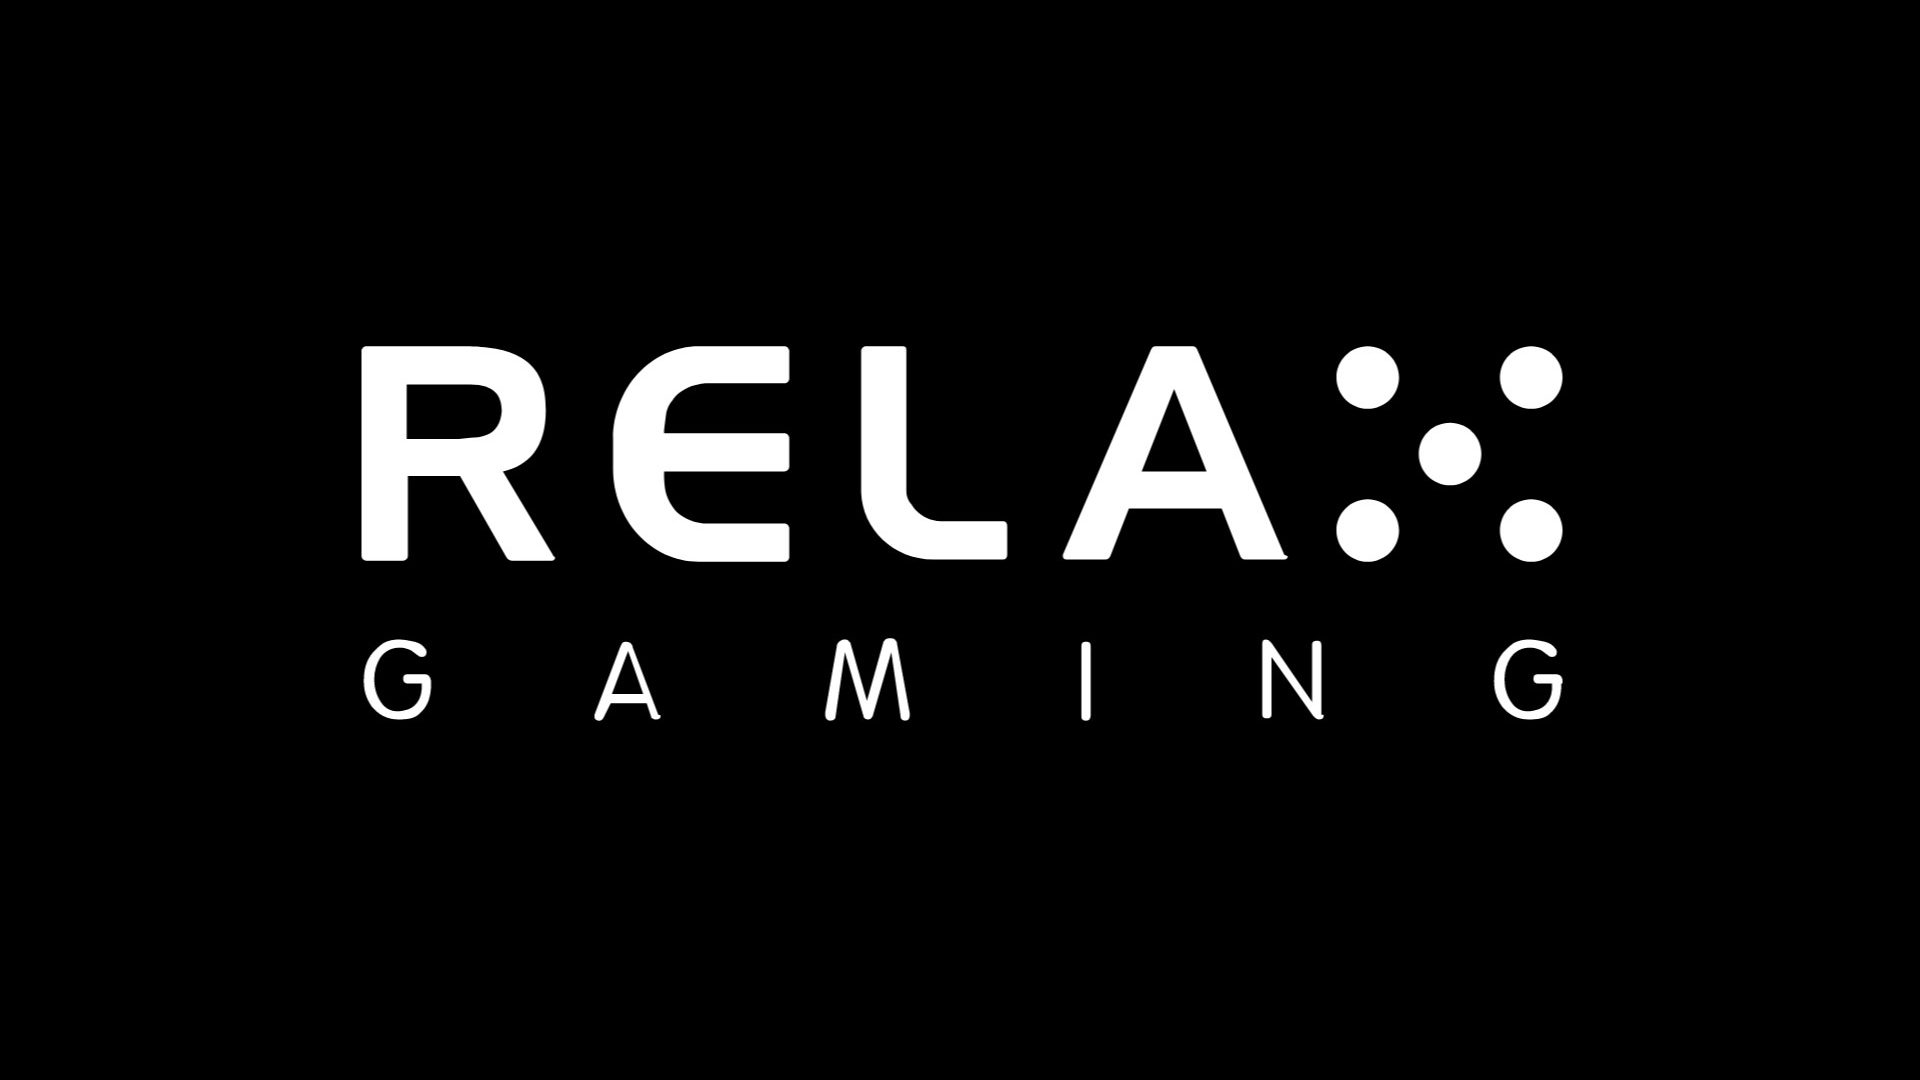 Markor Technology expands aggregation platform offering with Relax Gaming content